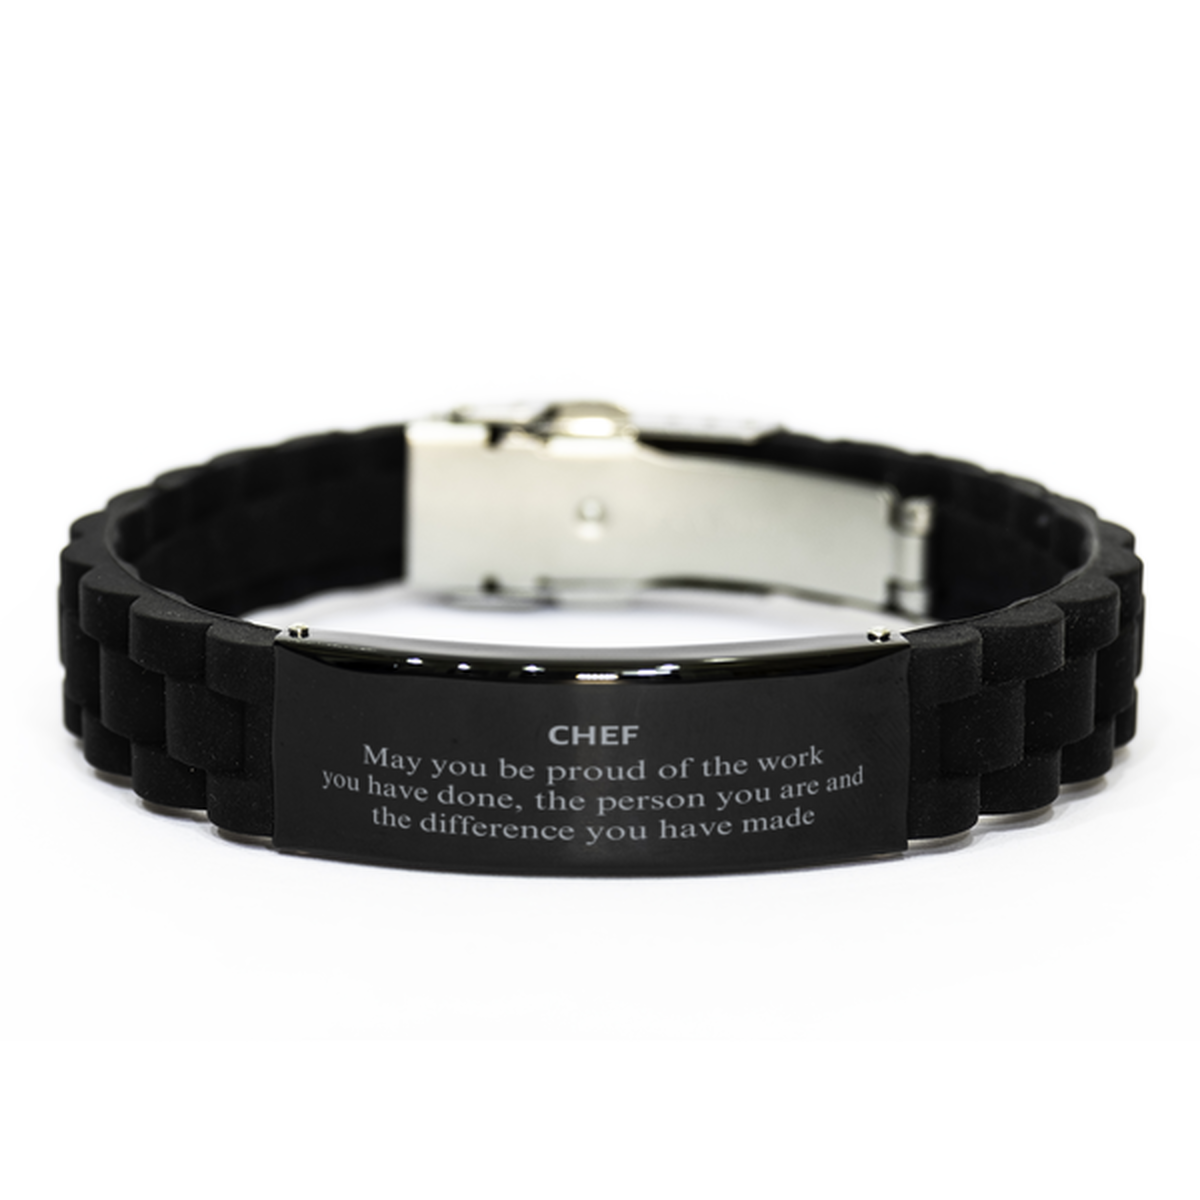 Chef May you be proud of the work you have done, Retirement Chef Black Glidelock Clasp Bracelet for Colleague Appreciation Gifts Amazing for Chef